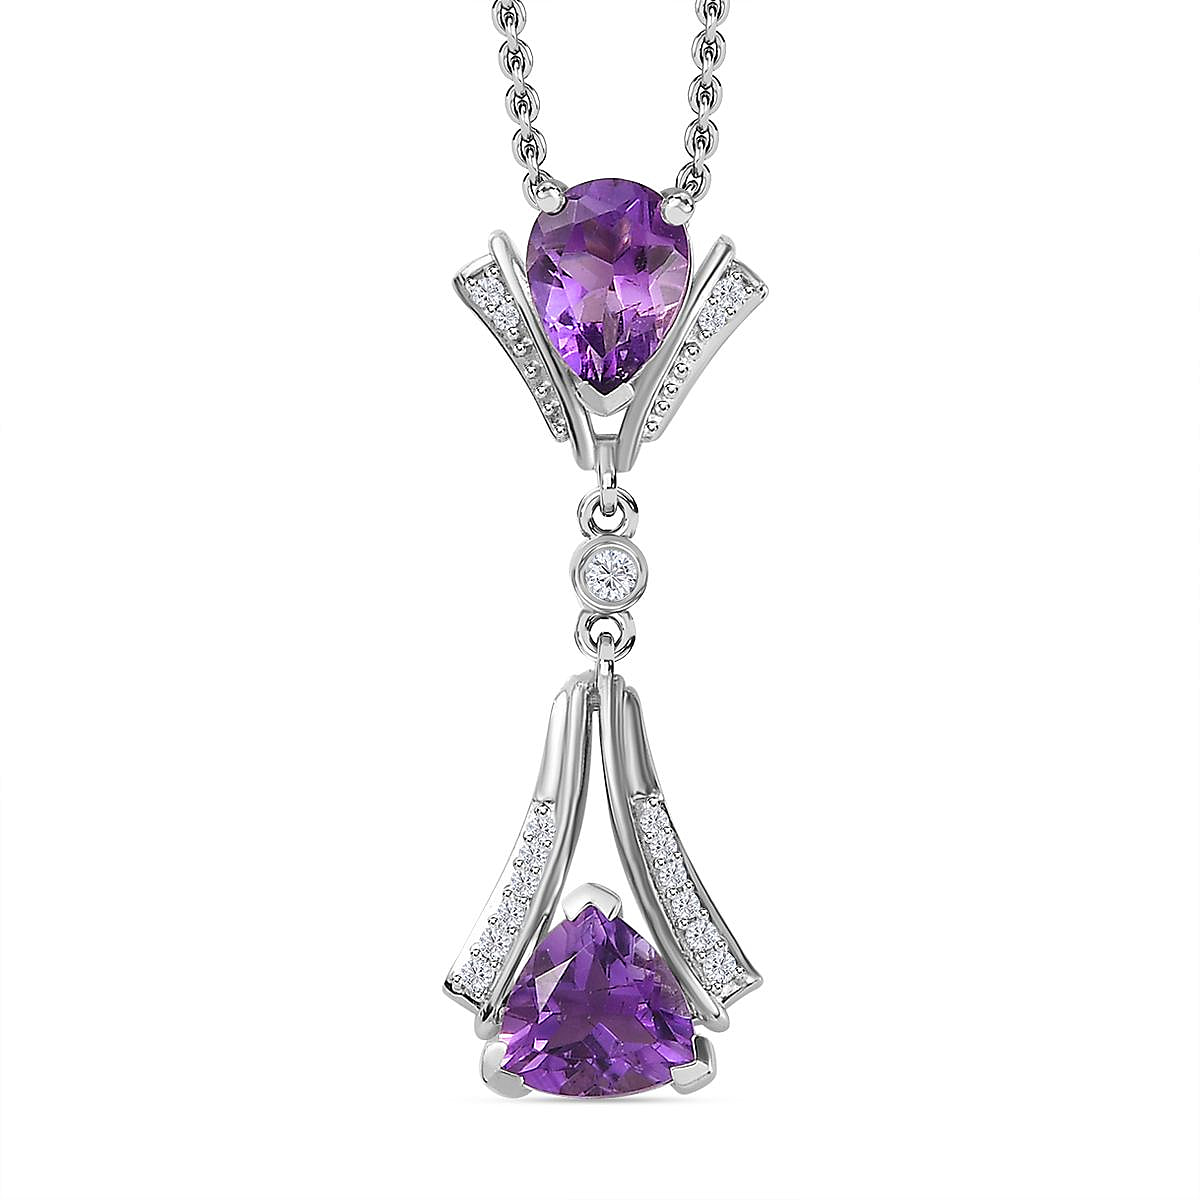 Moroccan Amethyst & Natural Zircon Pendant with Chain (Size 20) in Platinum Overlay Sterling Silver 1.80 Ct, Silver Wt 5.40 GM